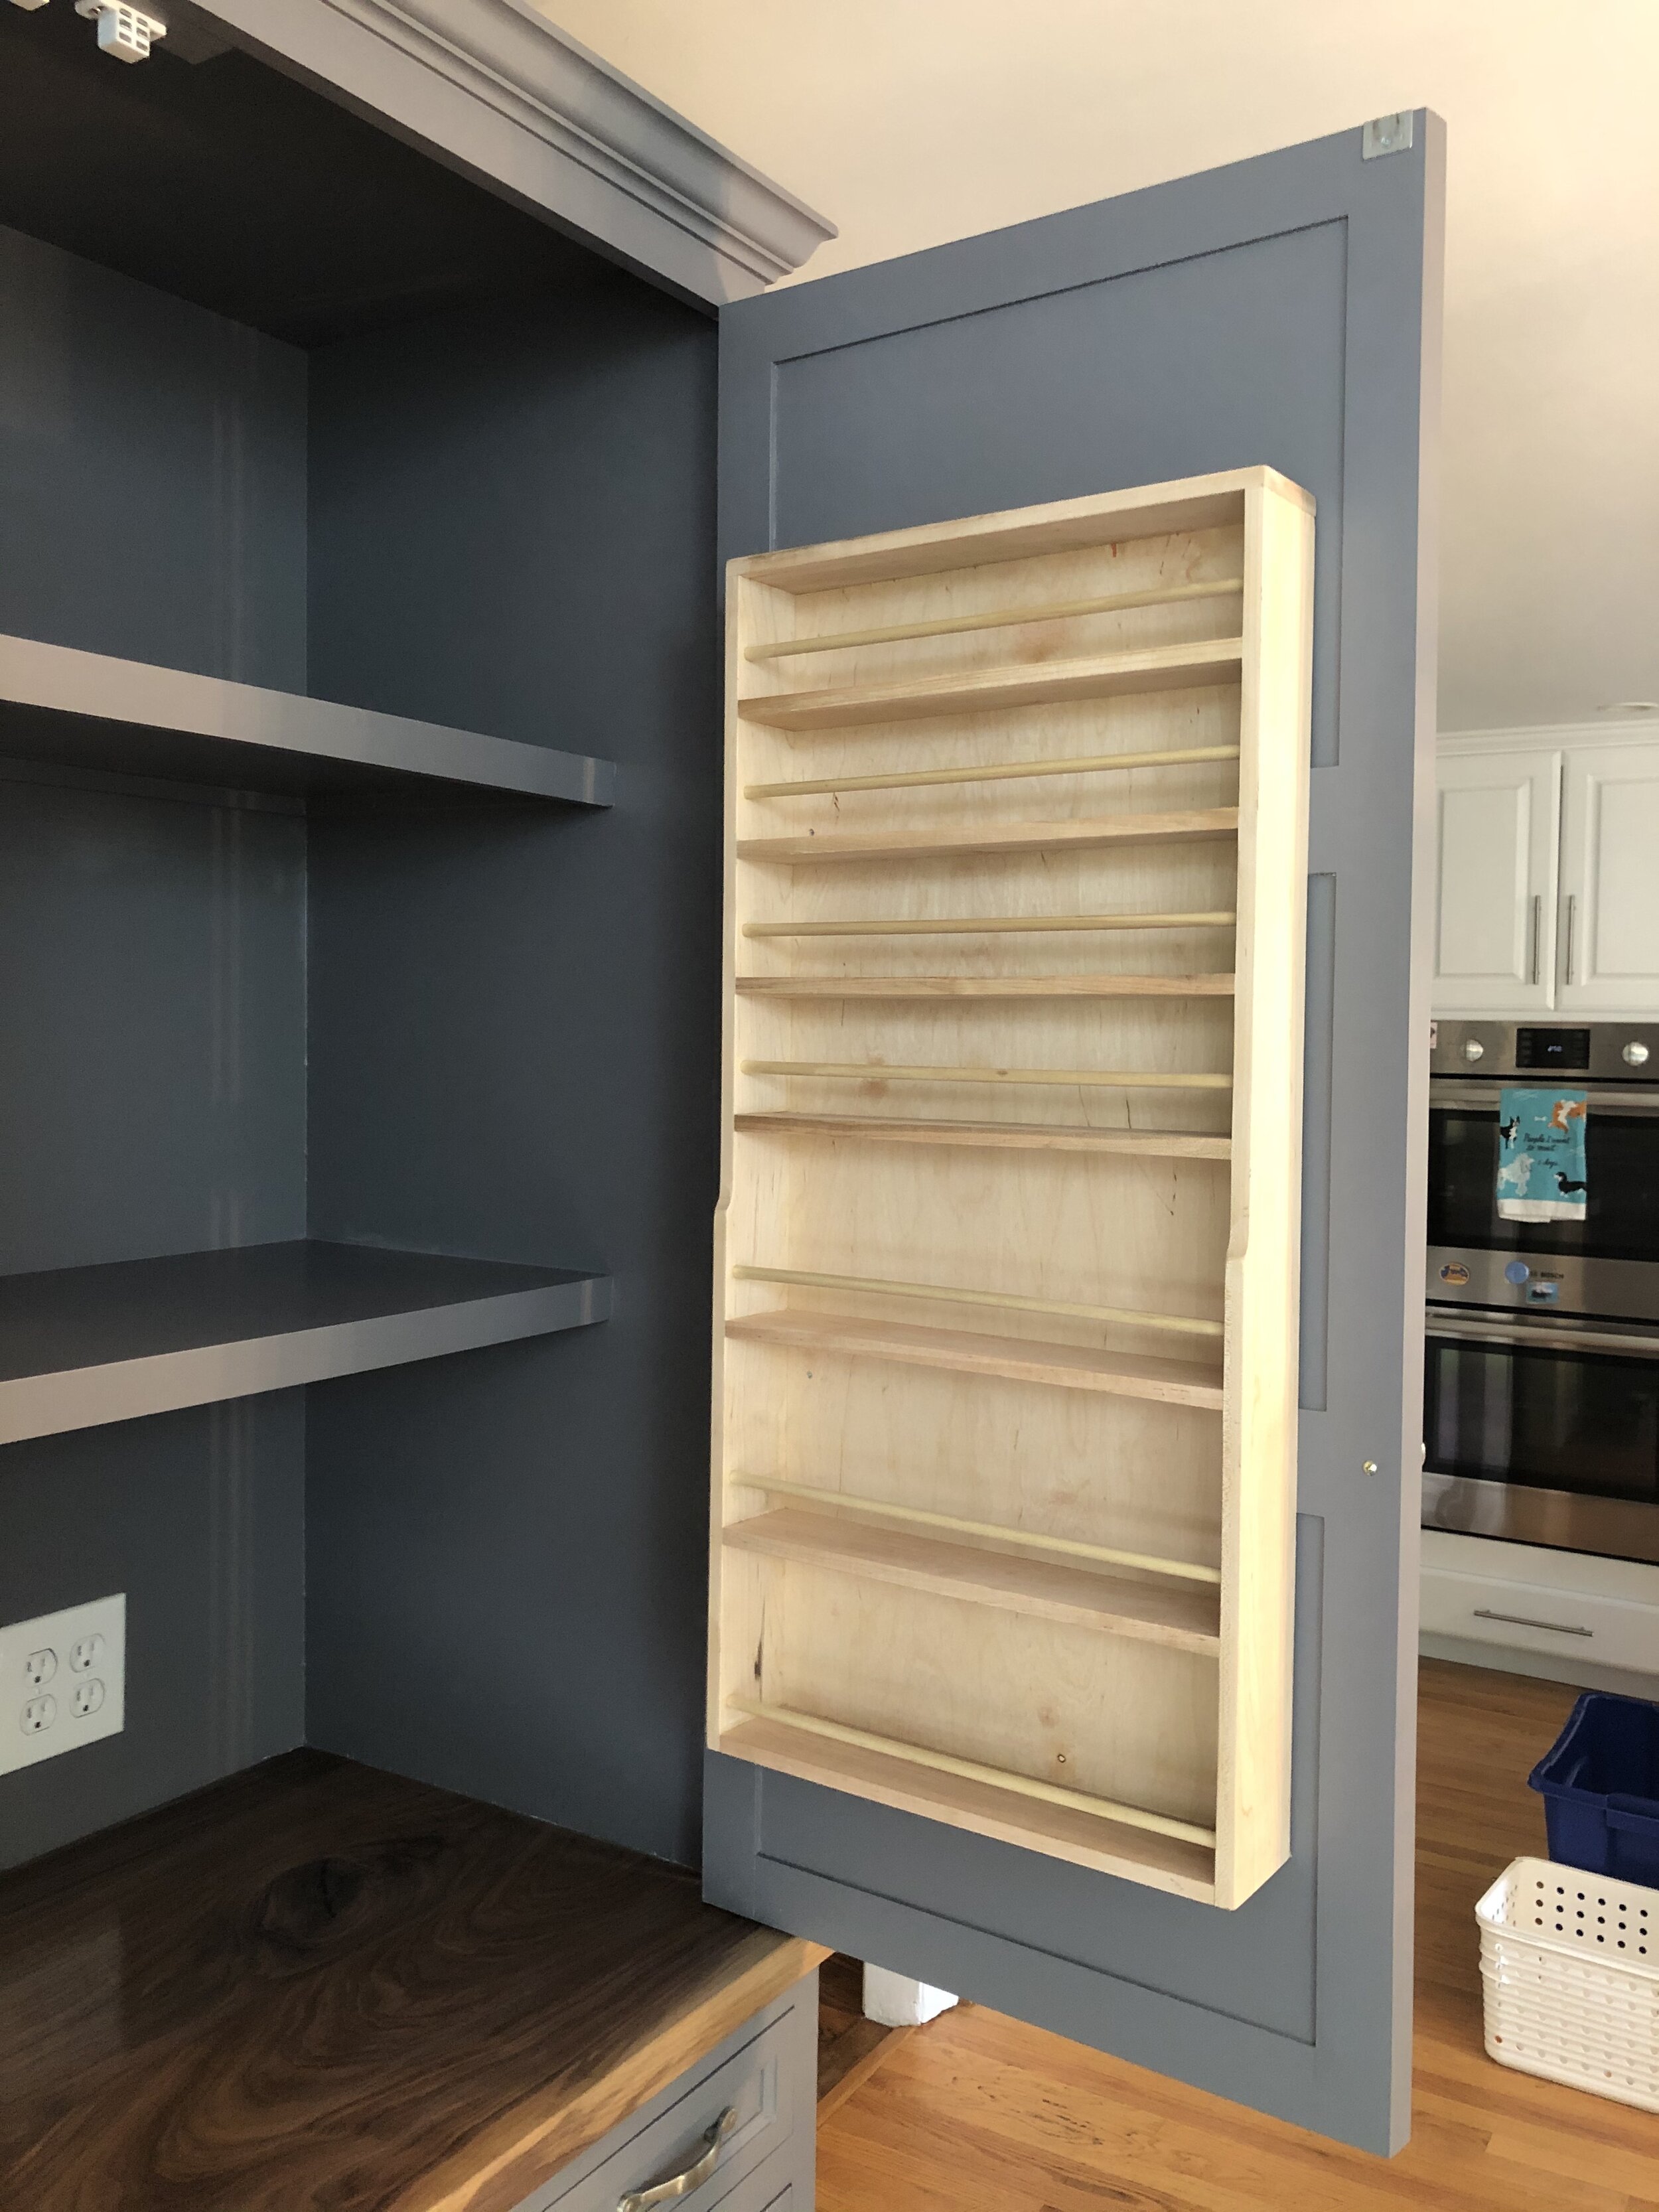  The spice racks are made primarily from maple with 3/8” dowels in front of each shelf. The four upper shelves are designed to hold small spice jars, while the three lower shelves are set up to accommodate larger ones. 